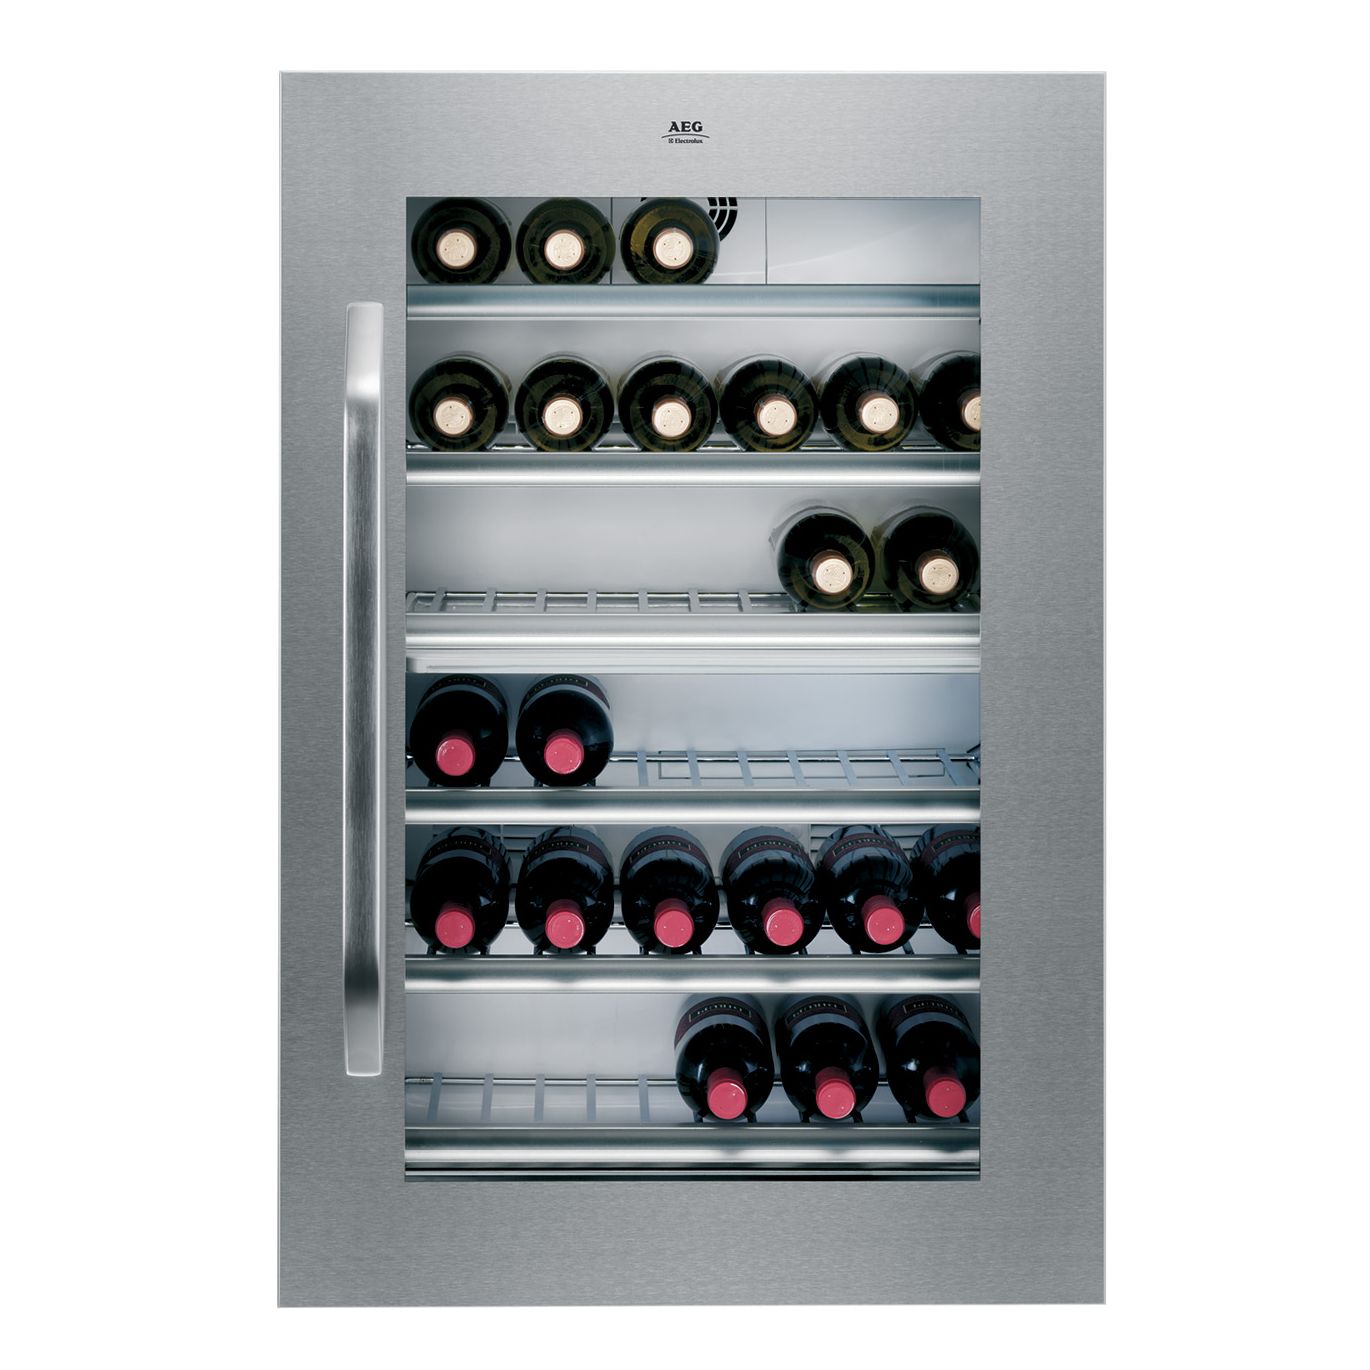 AEG SW988205R Wine Cooler, Stainless Steel at JohnLewis